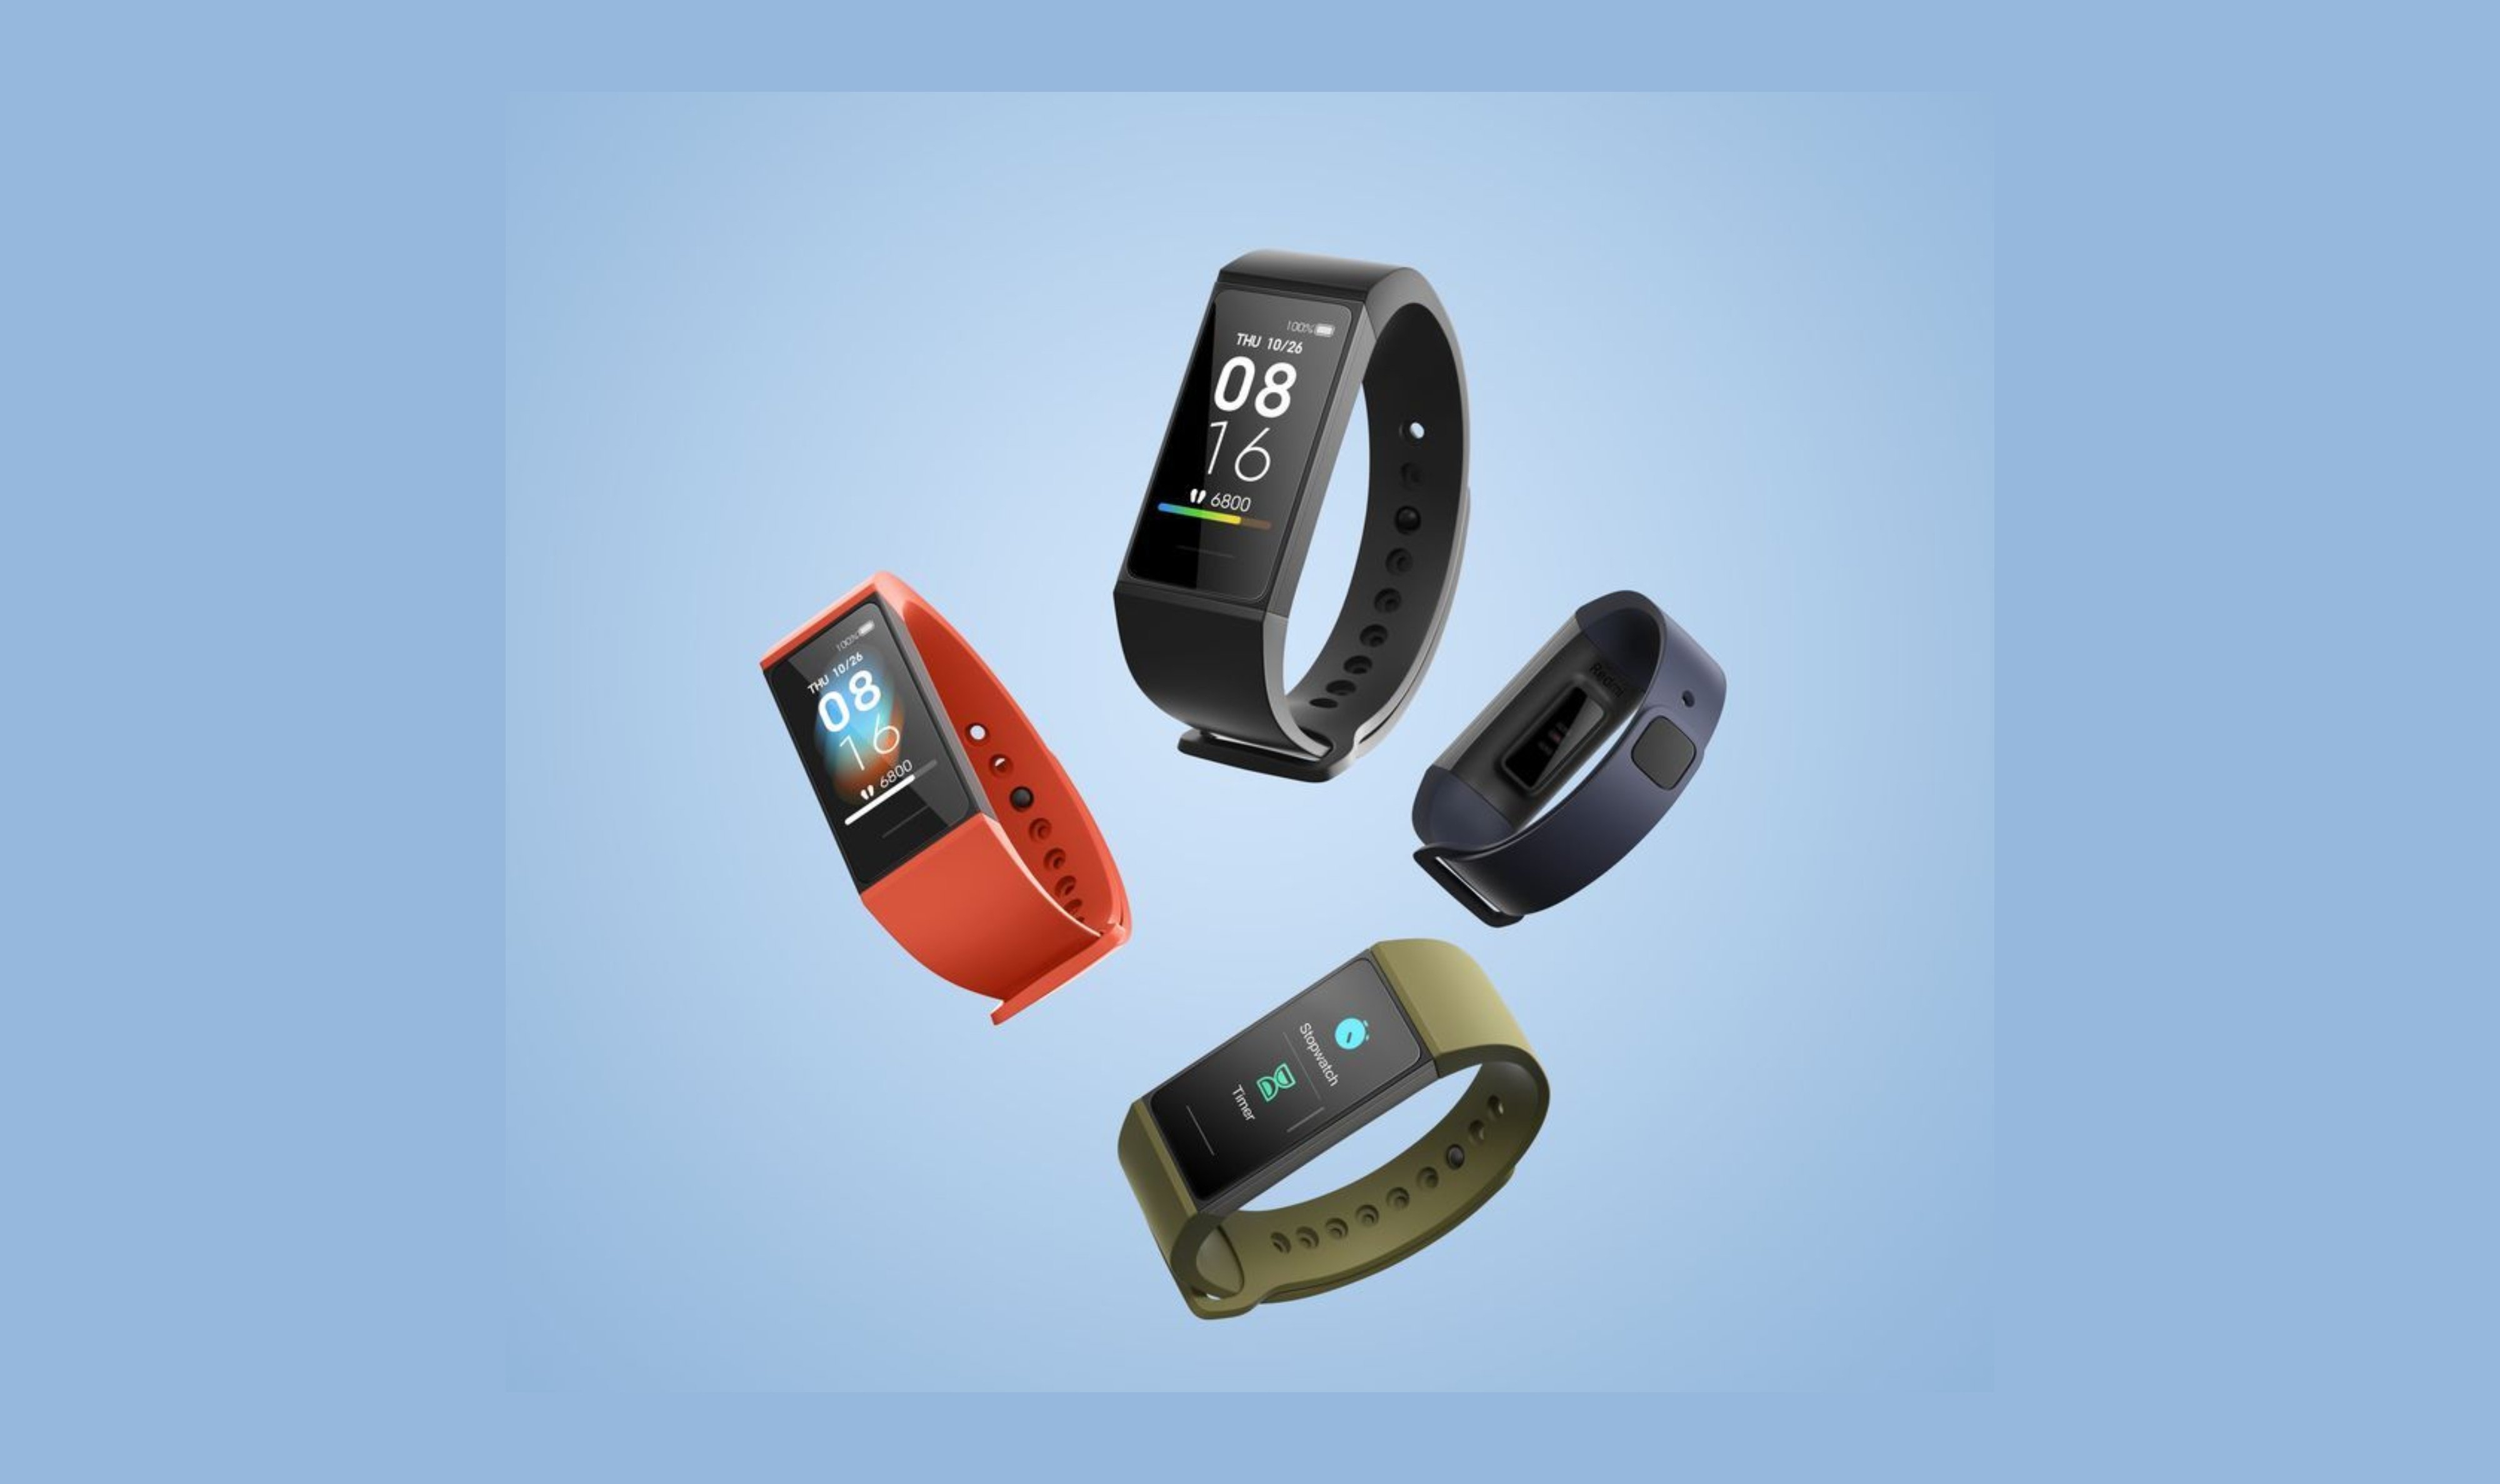 Smart Band (Fitness Tracker) Market Report 2022, Share, Size, Trends, Forecast and Analysis of Key players 2027